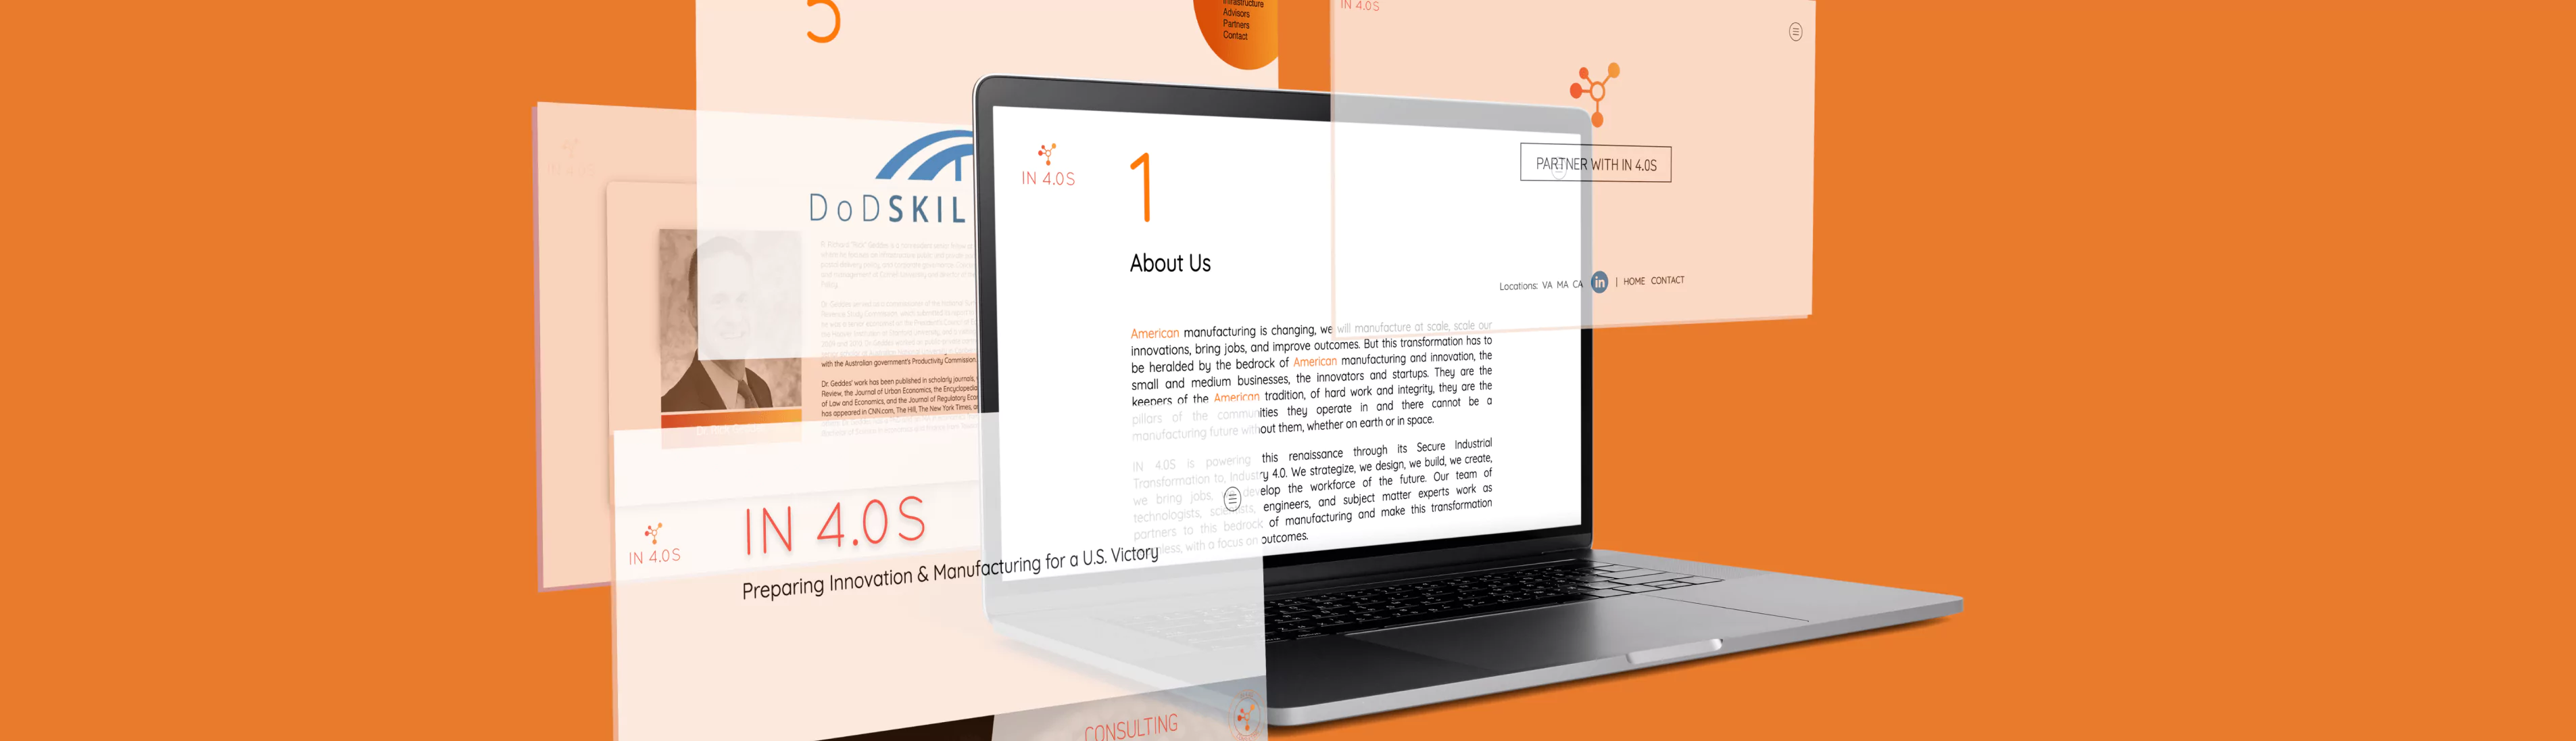 in4.0s company website pages shown on a laptop with orange background